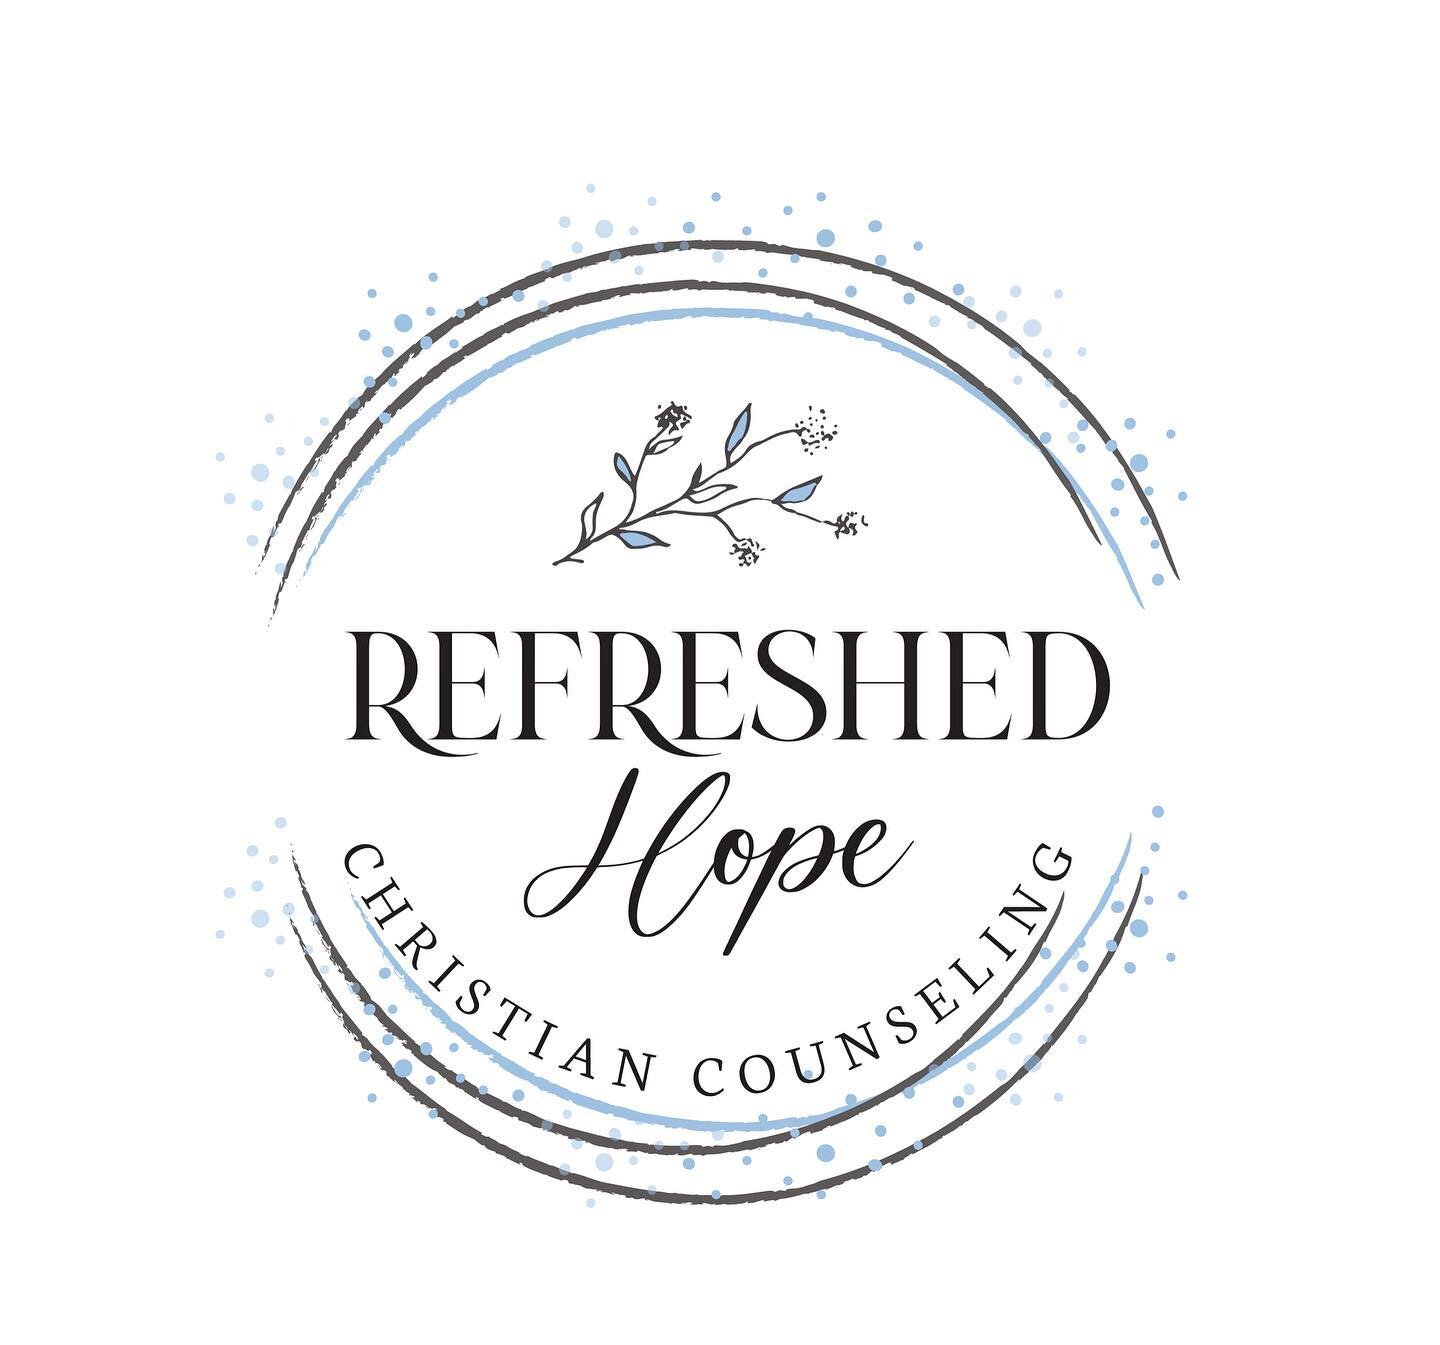 So excited to announce I will be opening my new practice in March 2022!!!🙌🏽🙌🏽🙌🏽😆 #Godisgood #comingsoon #marriagetherapy #relationshiptherapy #anxiety #perfectionism #christiancounseling #clttherapist #huntersvillenc #selfcompassion #hope #chr